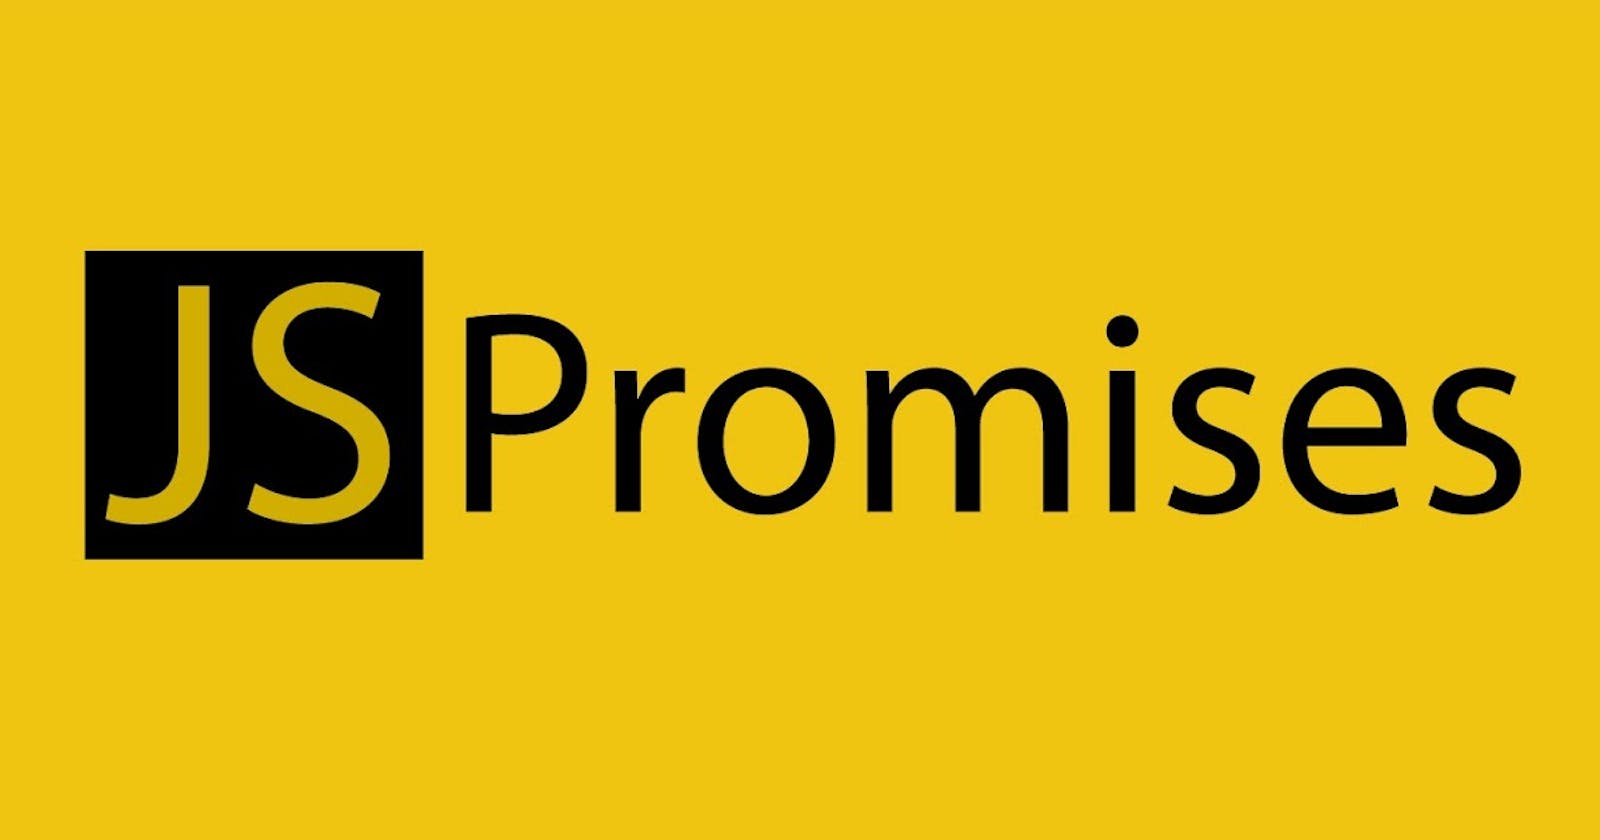 How promise executes behind the scene in JavaScript